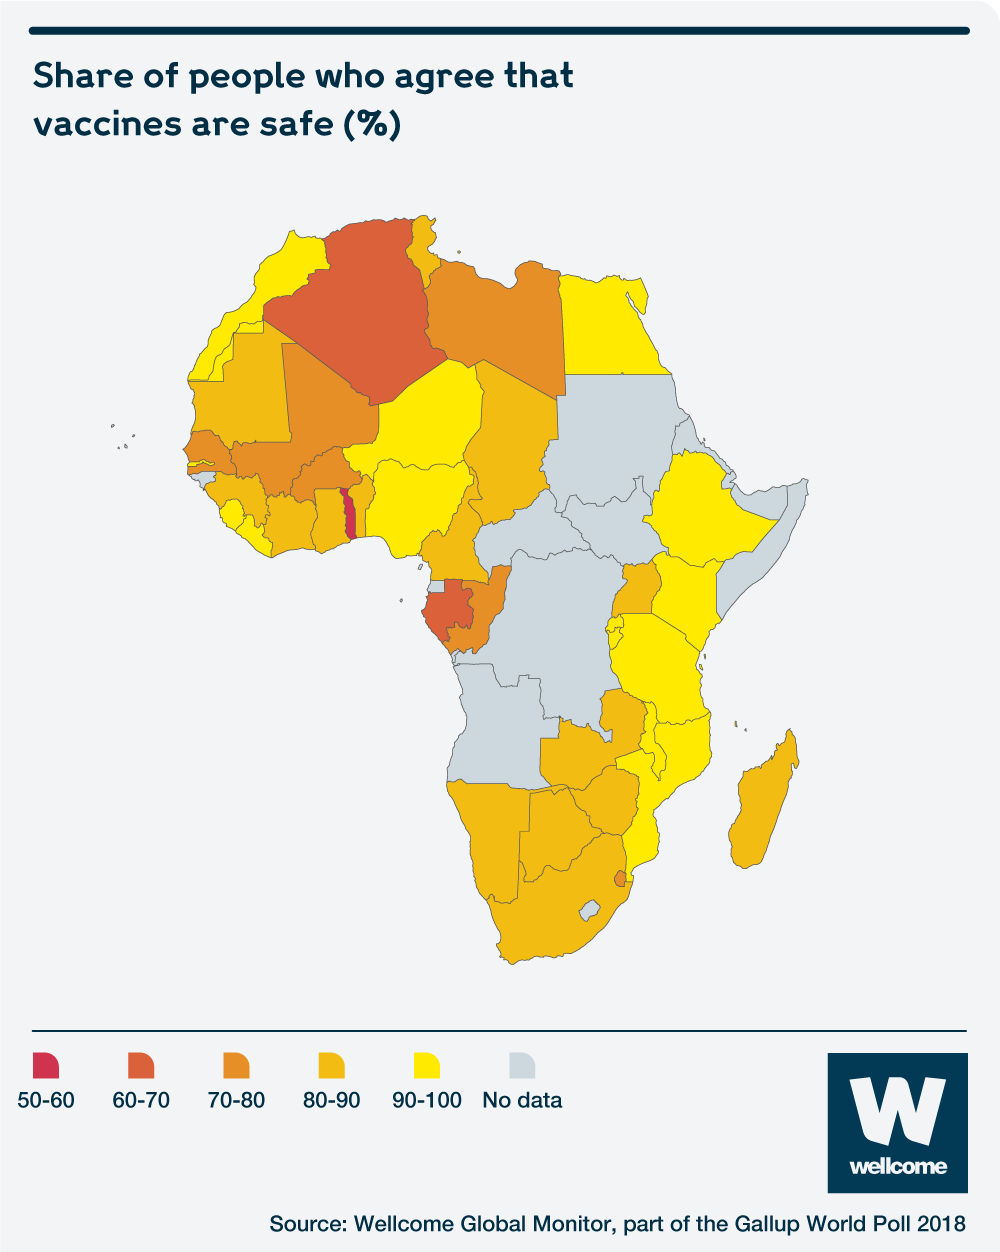 Map showing share of people in different African countries who agree that vaccines are safe